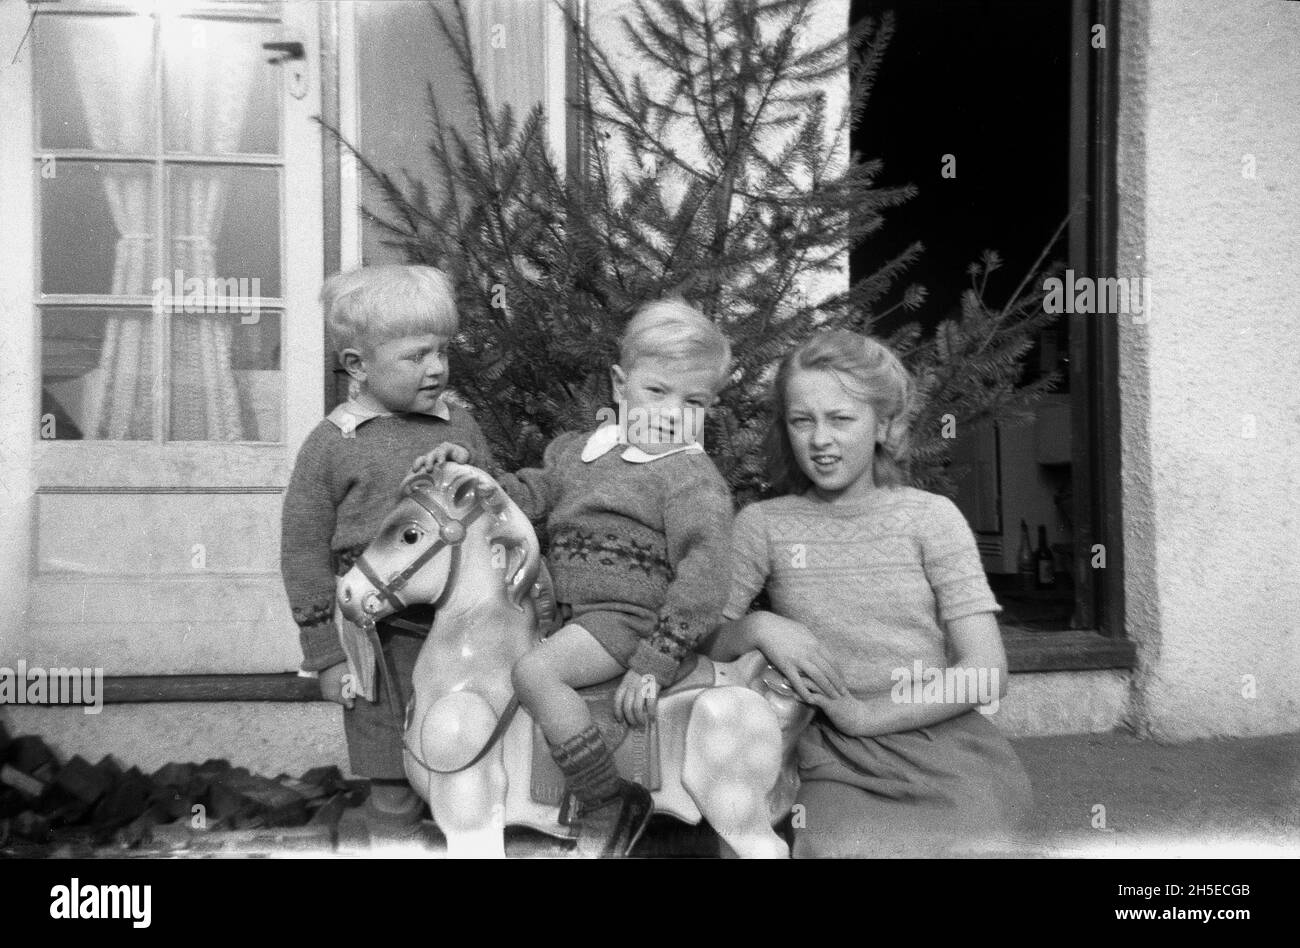 1940s, historical, outside the back of a house, a small boy sitting on a toy rocking horse, with his brother and sister beside him, England, UK, perhaps a xmas present, as there is a Christmas tree leaning against the wall by the back door. Stock Photo